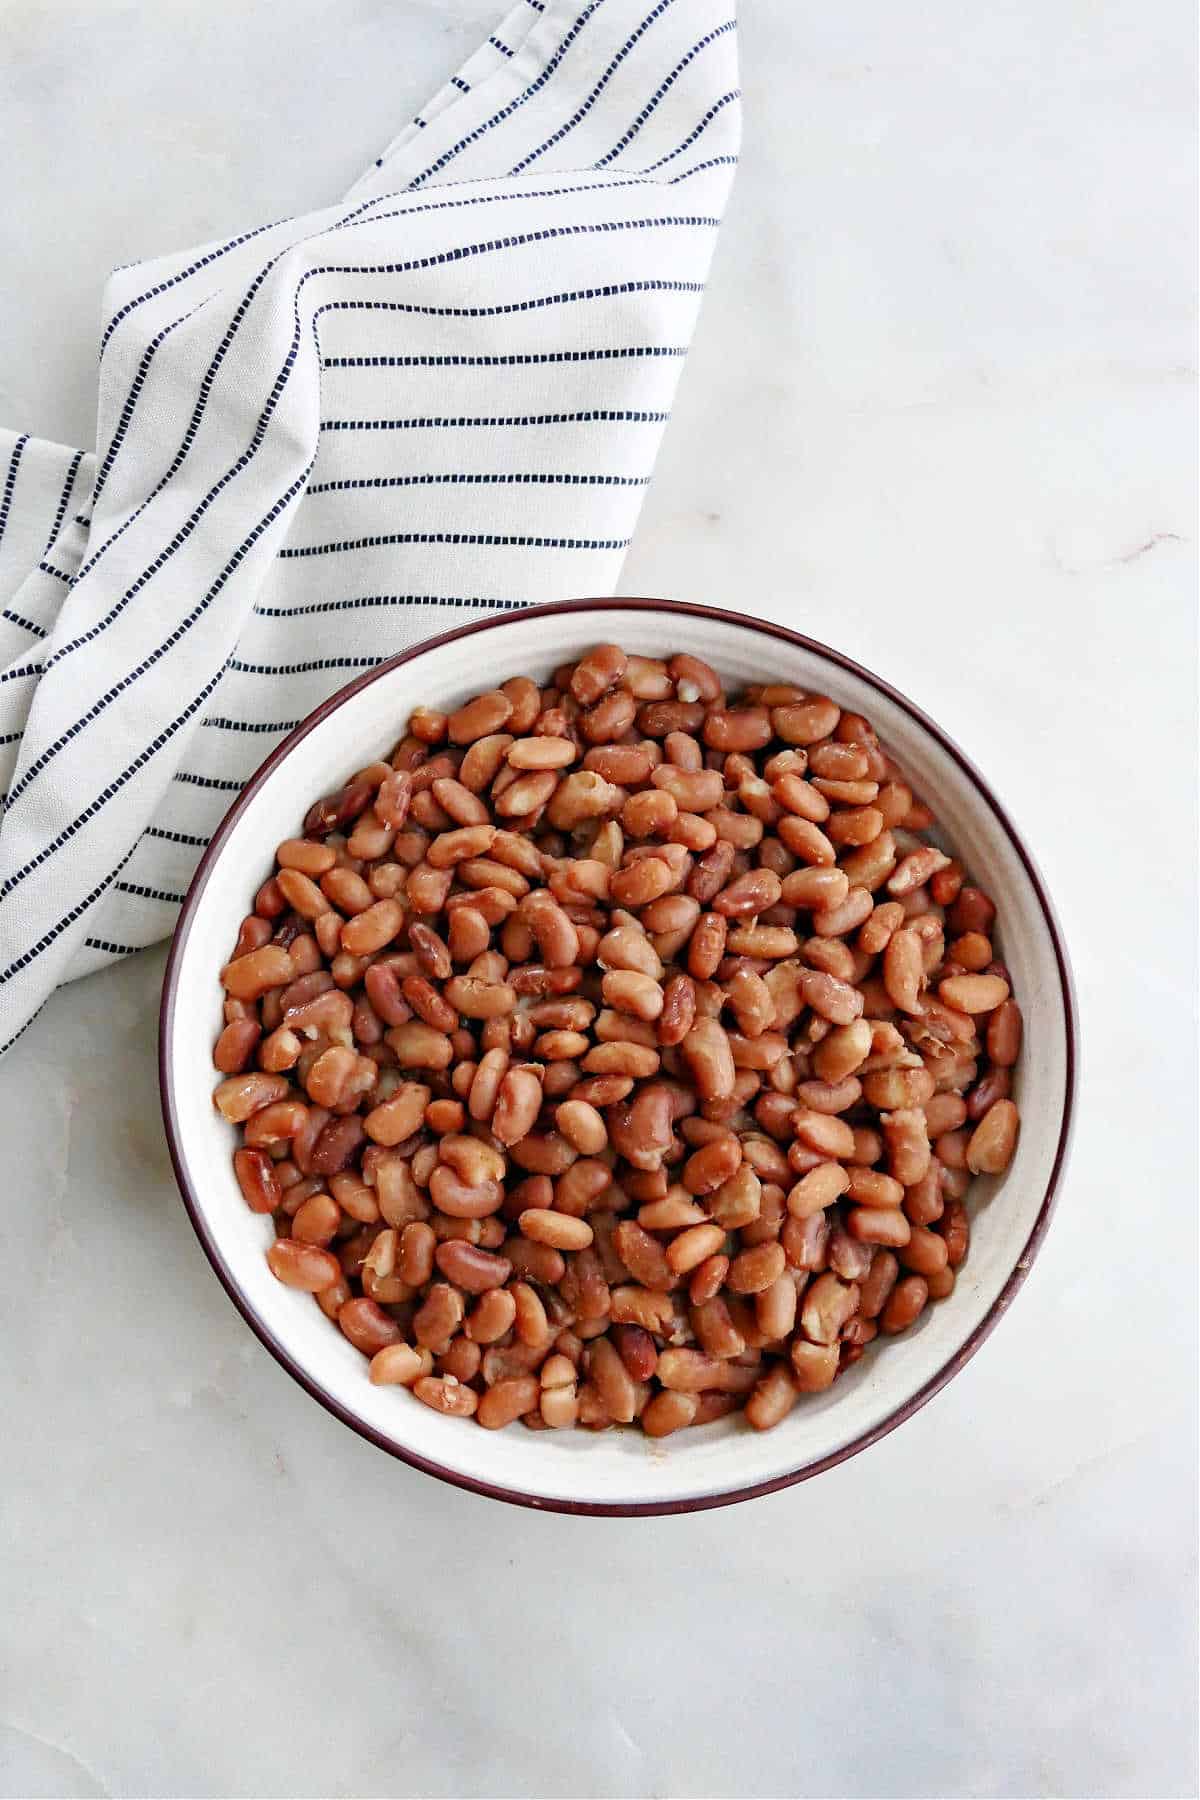 Instant Pot pinto beans in a serving bowl on a counter next to a striped napkin